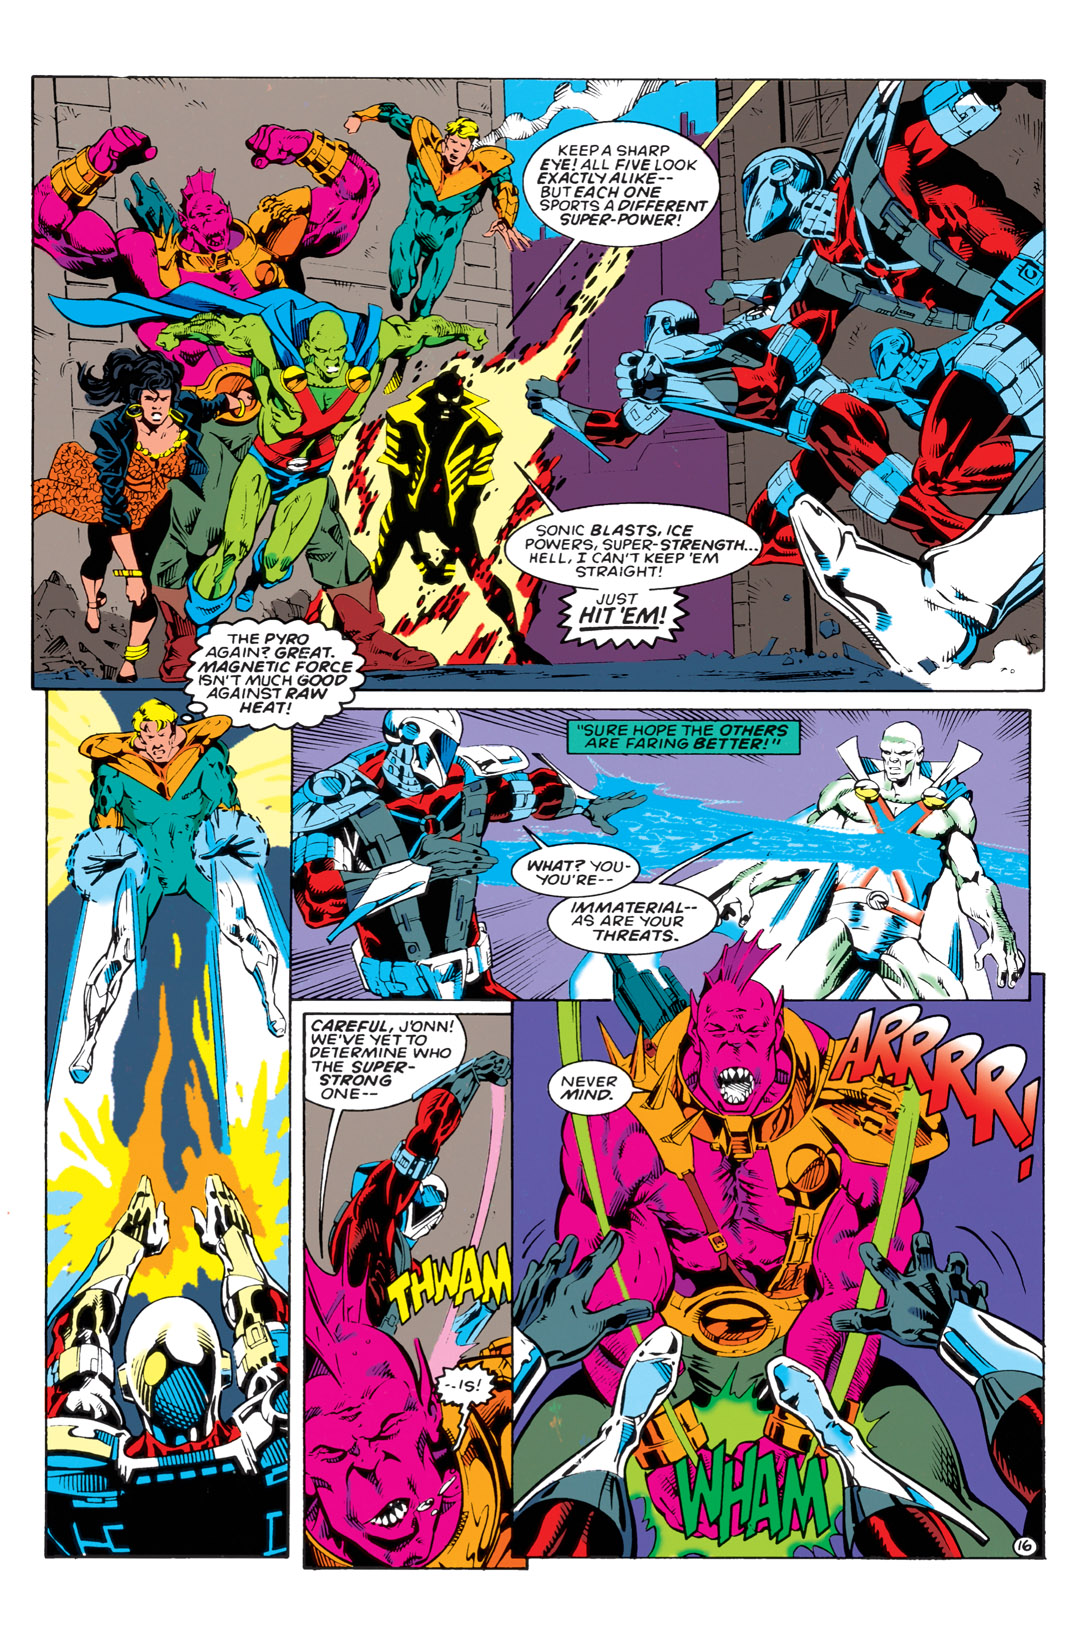 Justice League Task Force 0 Page 11